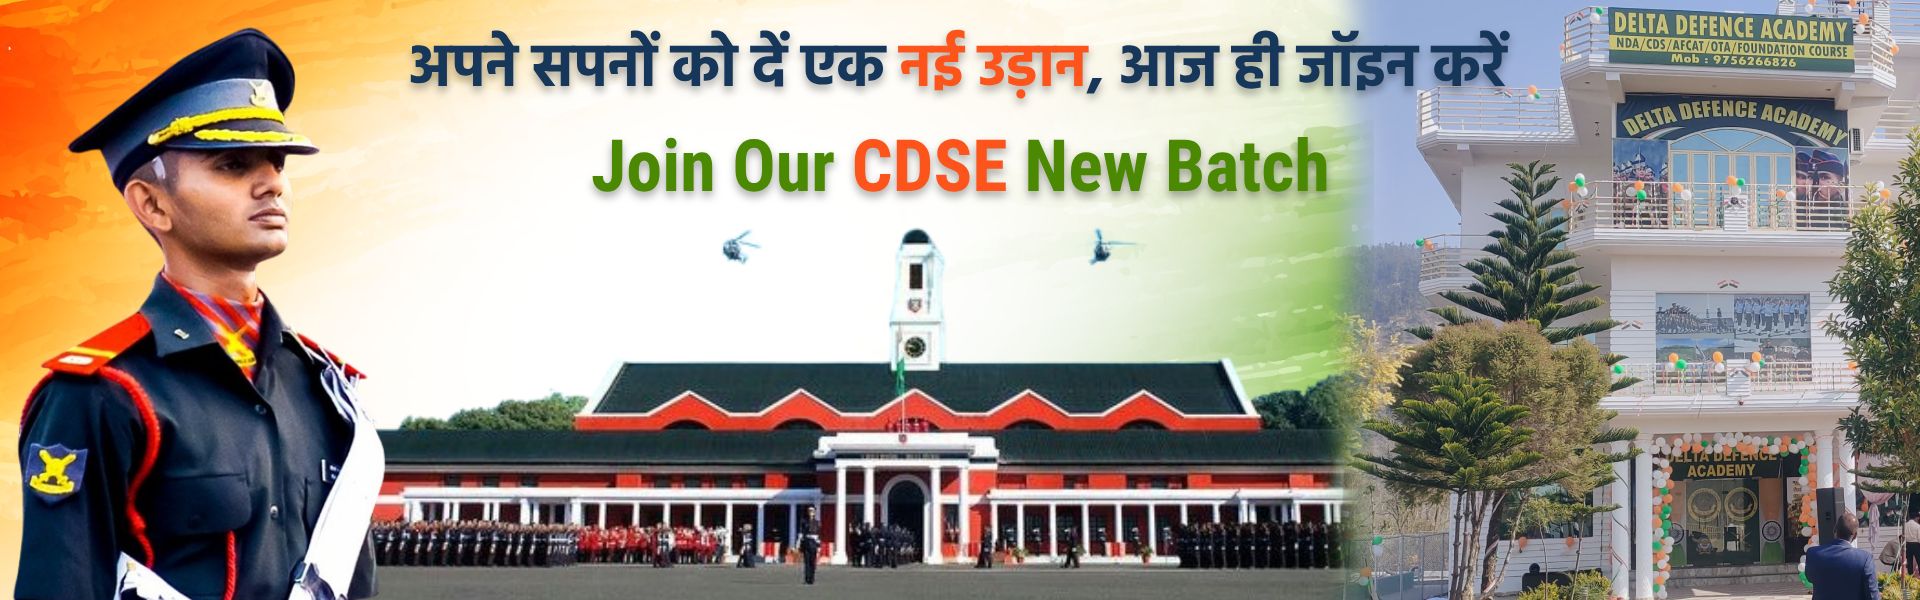 join delta defence academy cds new- batch